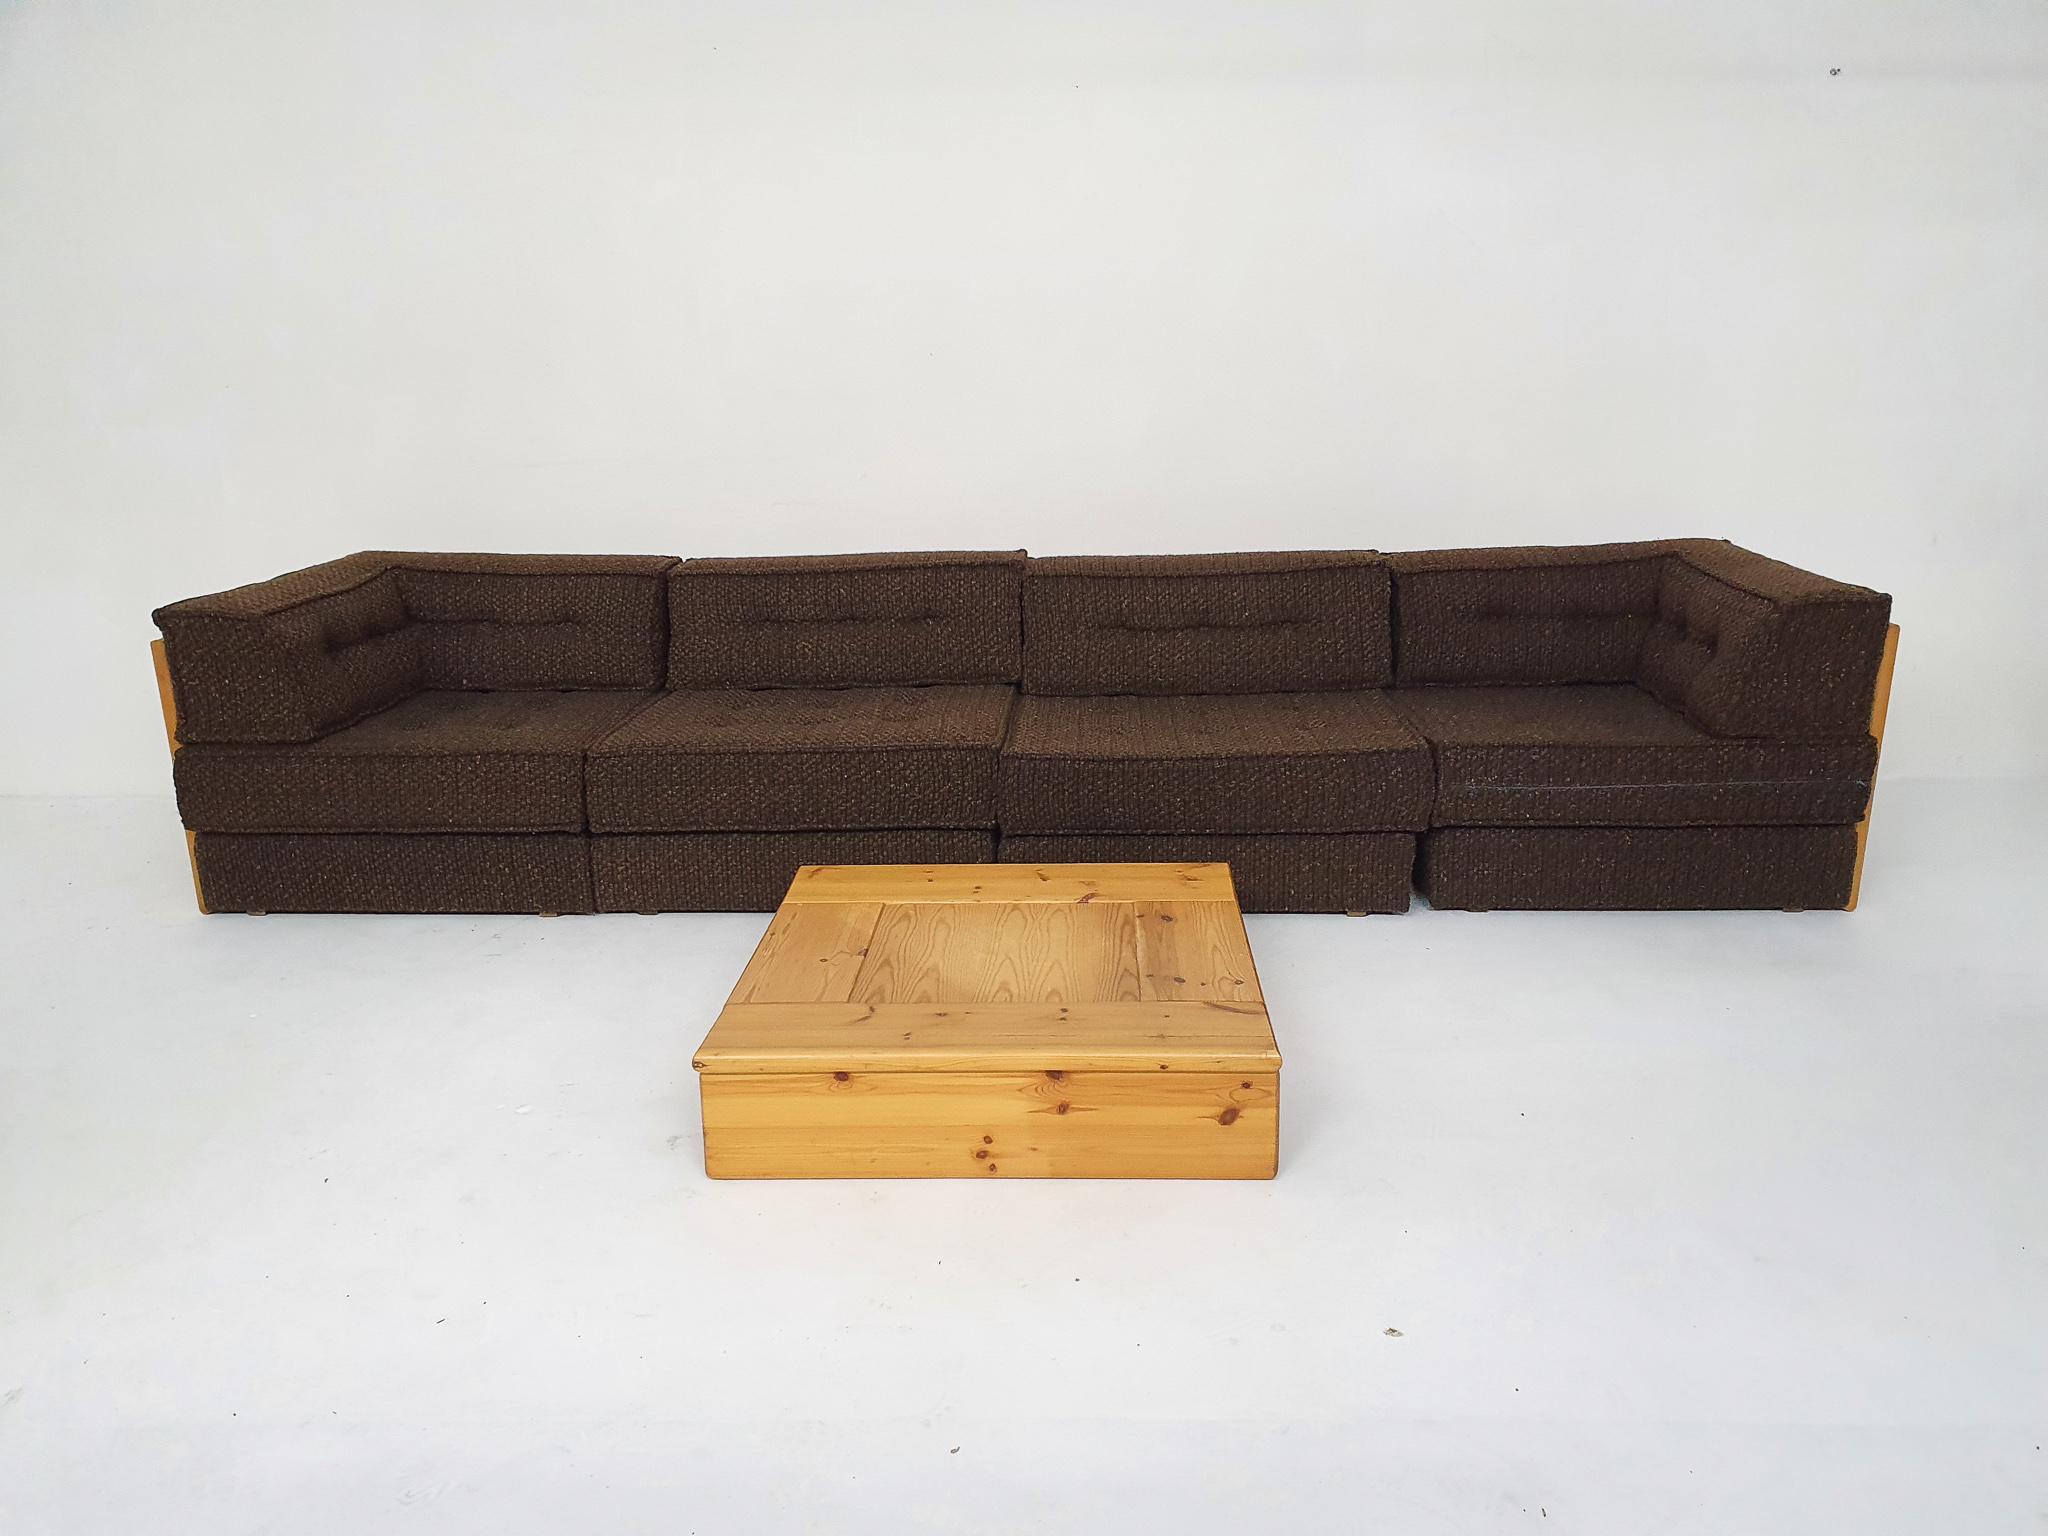 Pinewood sofa with the orignal brown wool upholstery. The set consist of:
2 corner elements (80 x 80 x 50cm LxWxH)
2 middle elements(80 x 80 x 50cm LxWxH)
1 coffee table (78 x 78 x 20cm LxWxH)
1 side table
All in good condition.